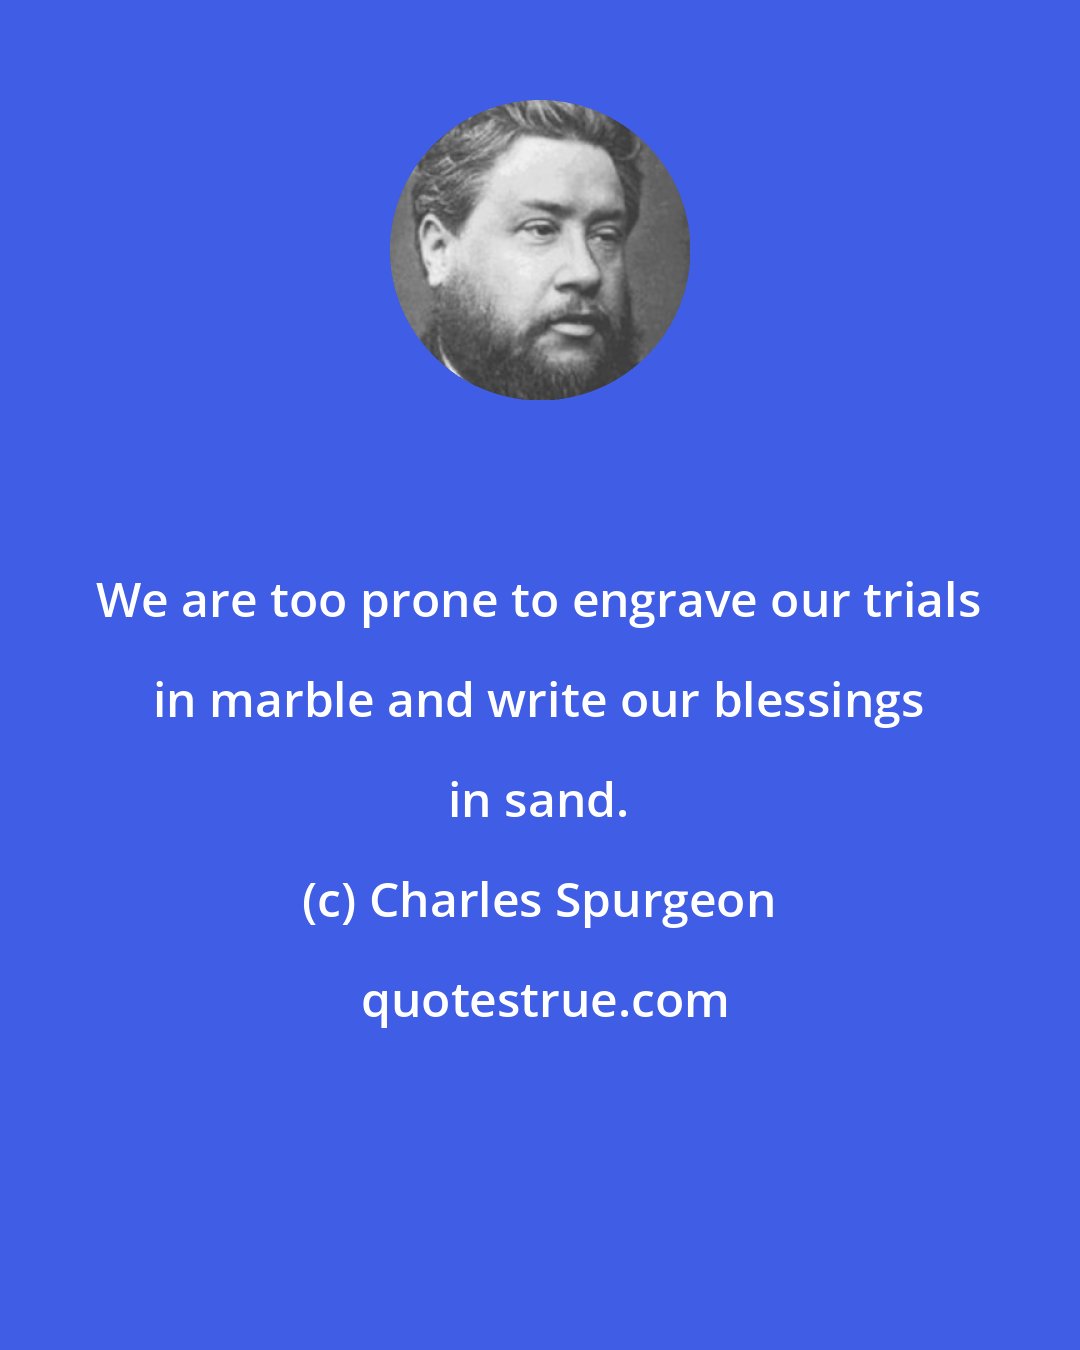 Charles Spurgeon: We are too prone to engrave our trials in marble and write our blessings in sand.